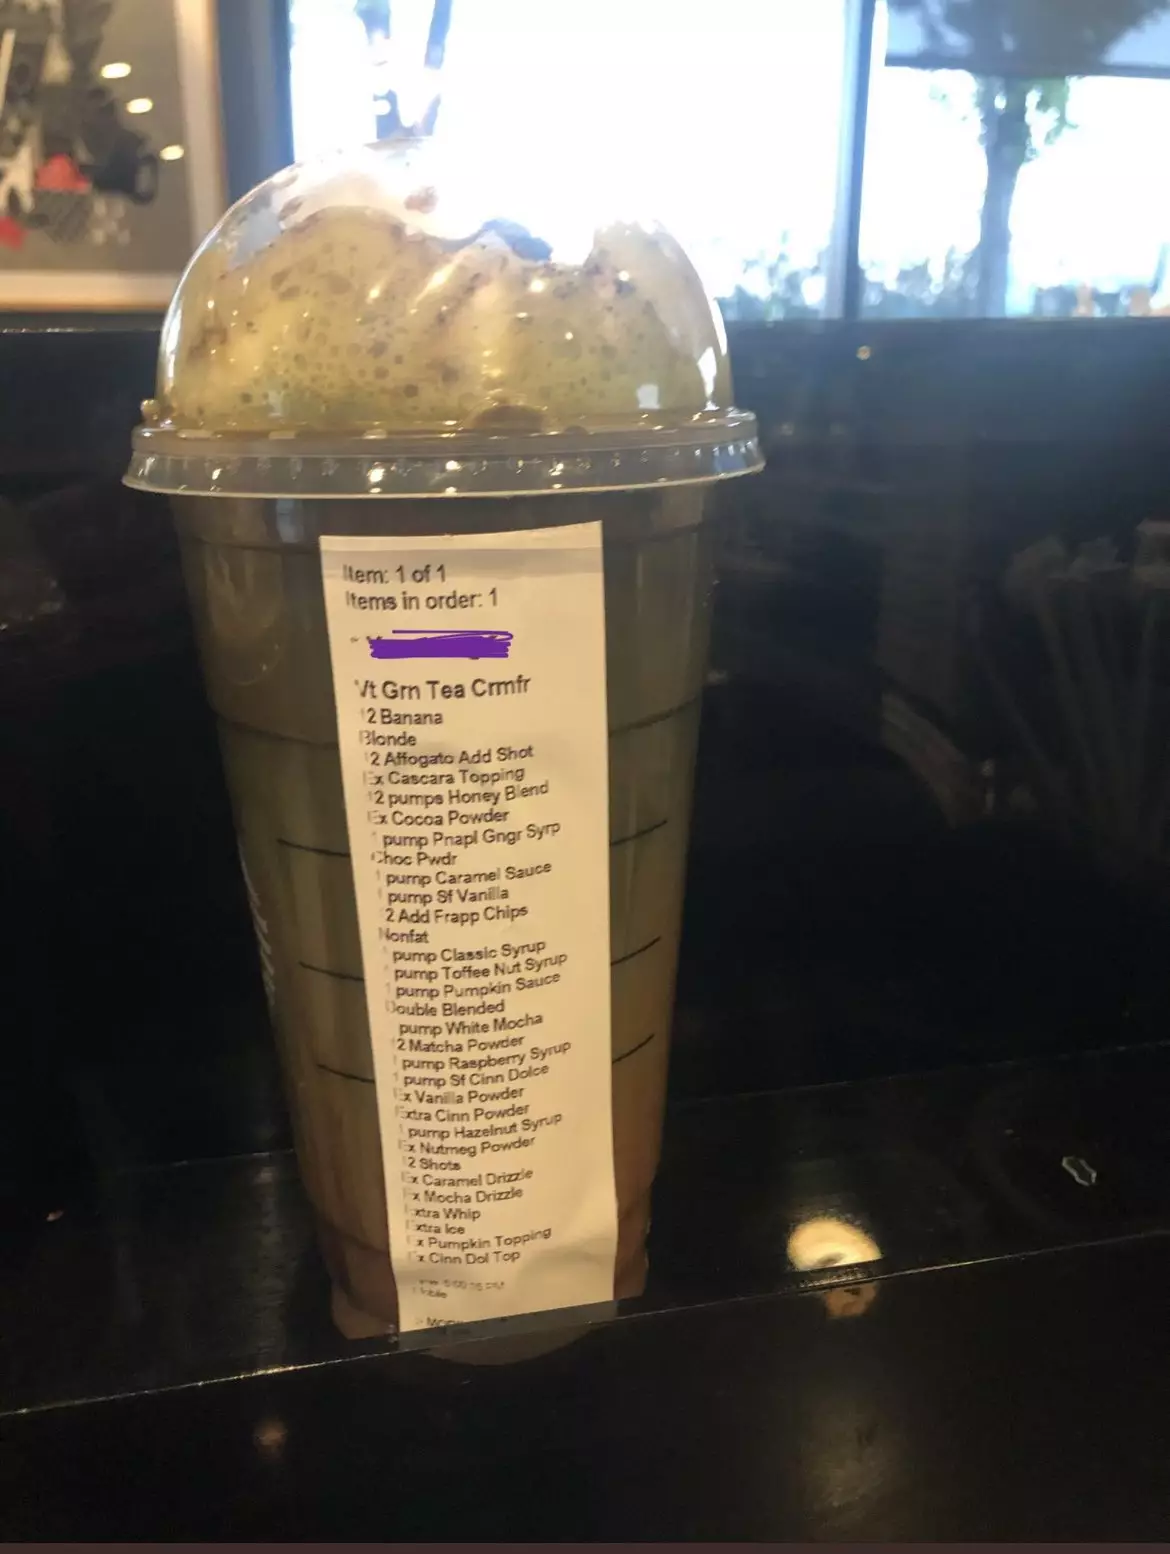 A recent example of a complex customised Starbucks order.